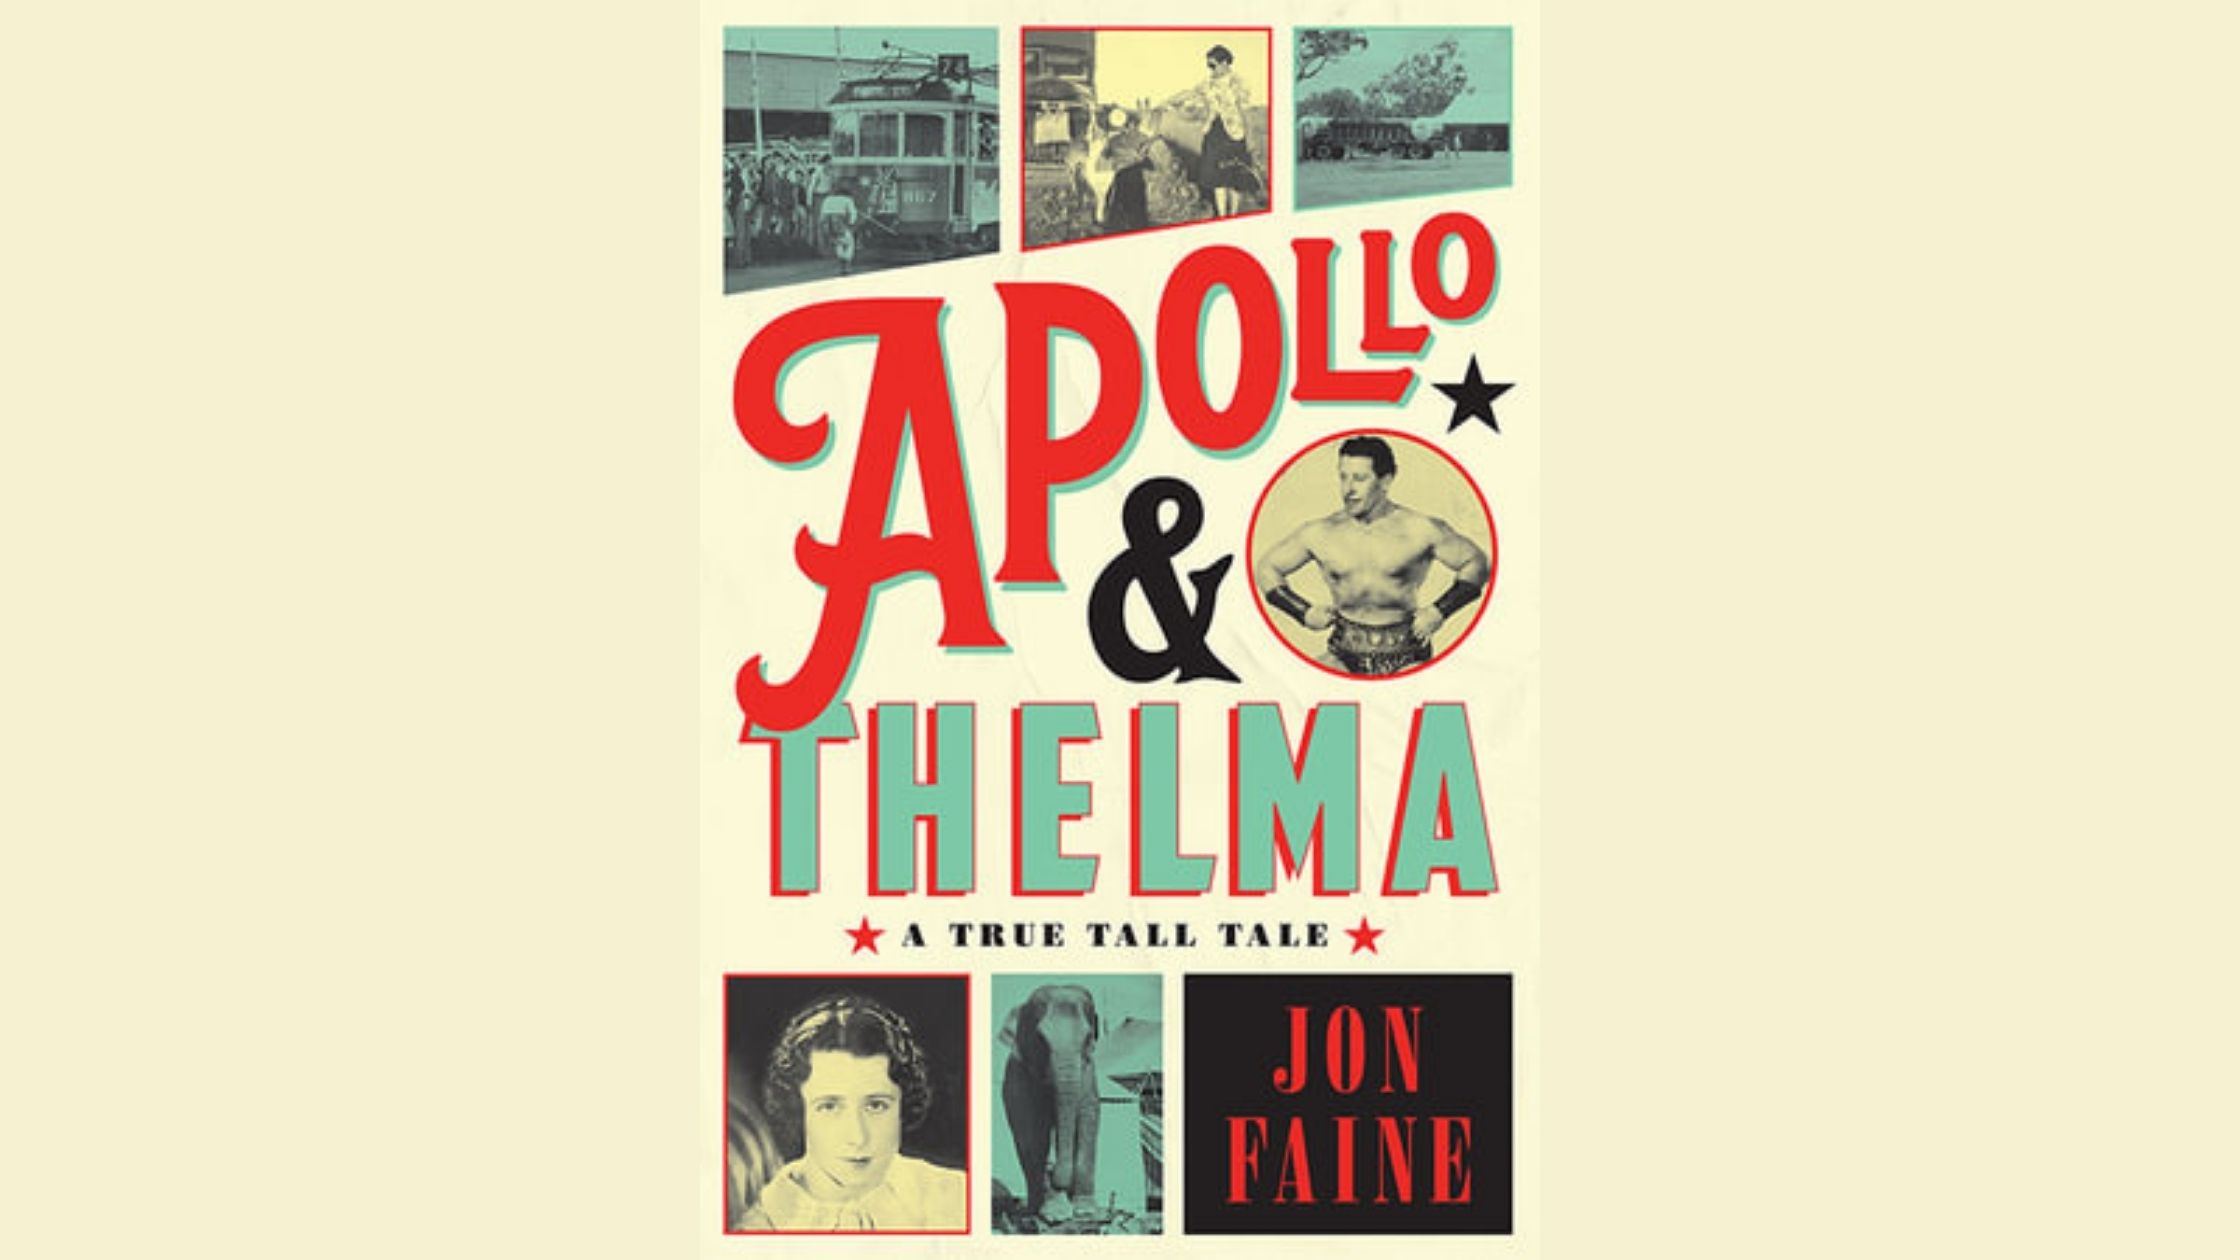 Apollo and Thelma, A Book by Our Conference MC, Jon Faine